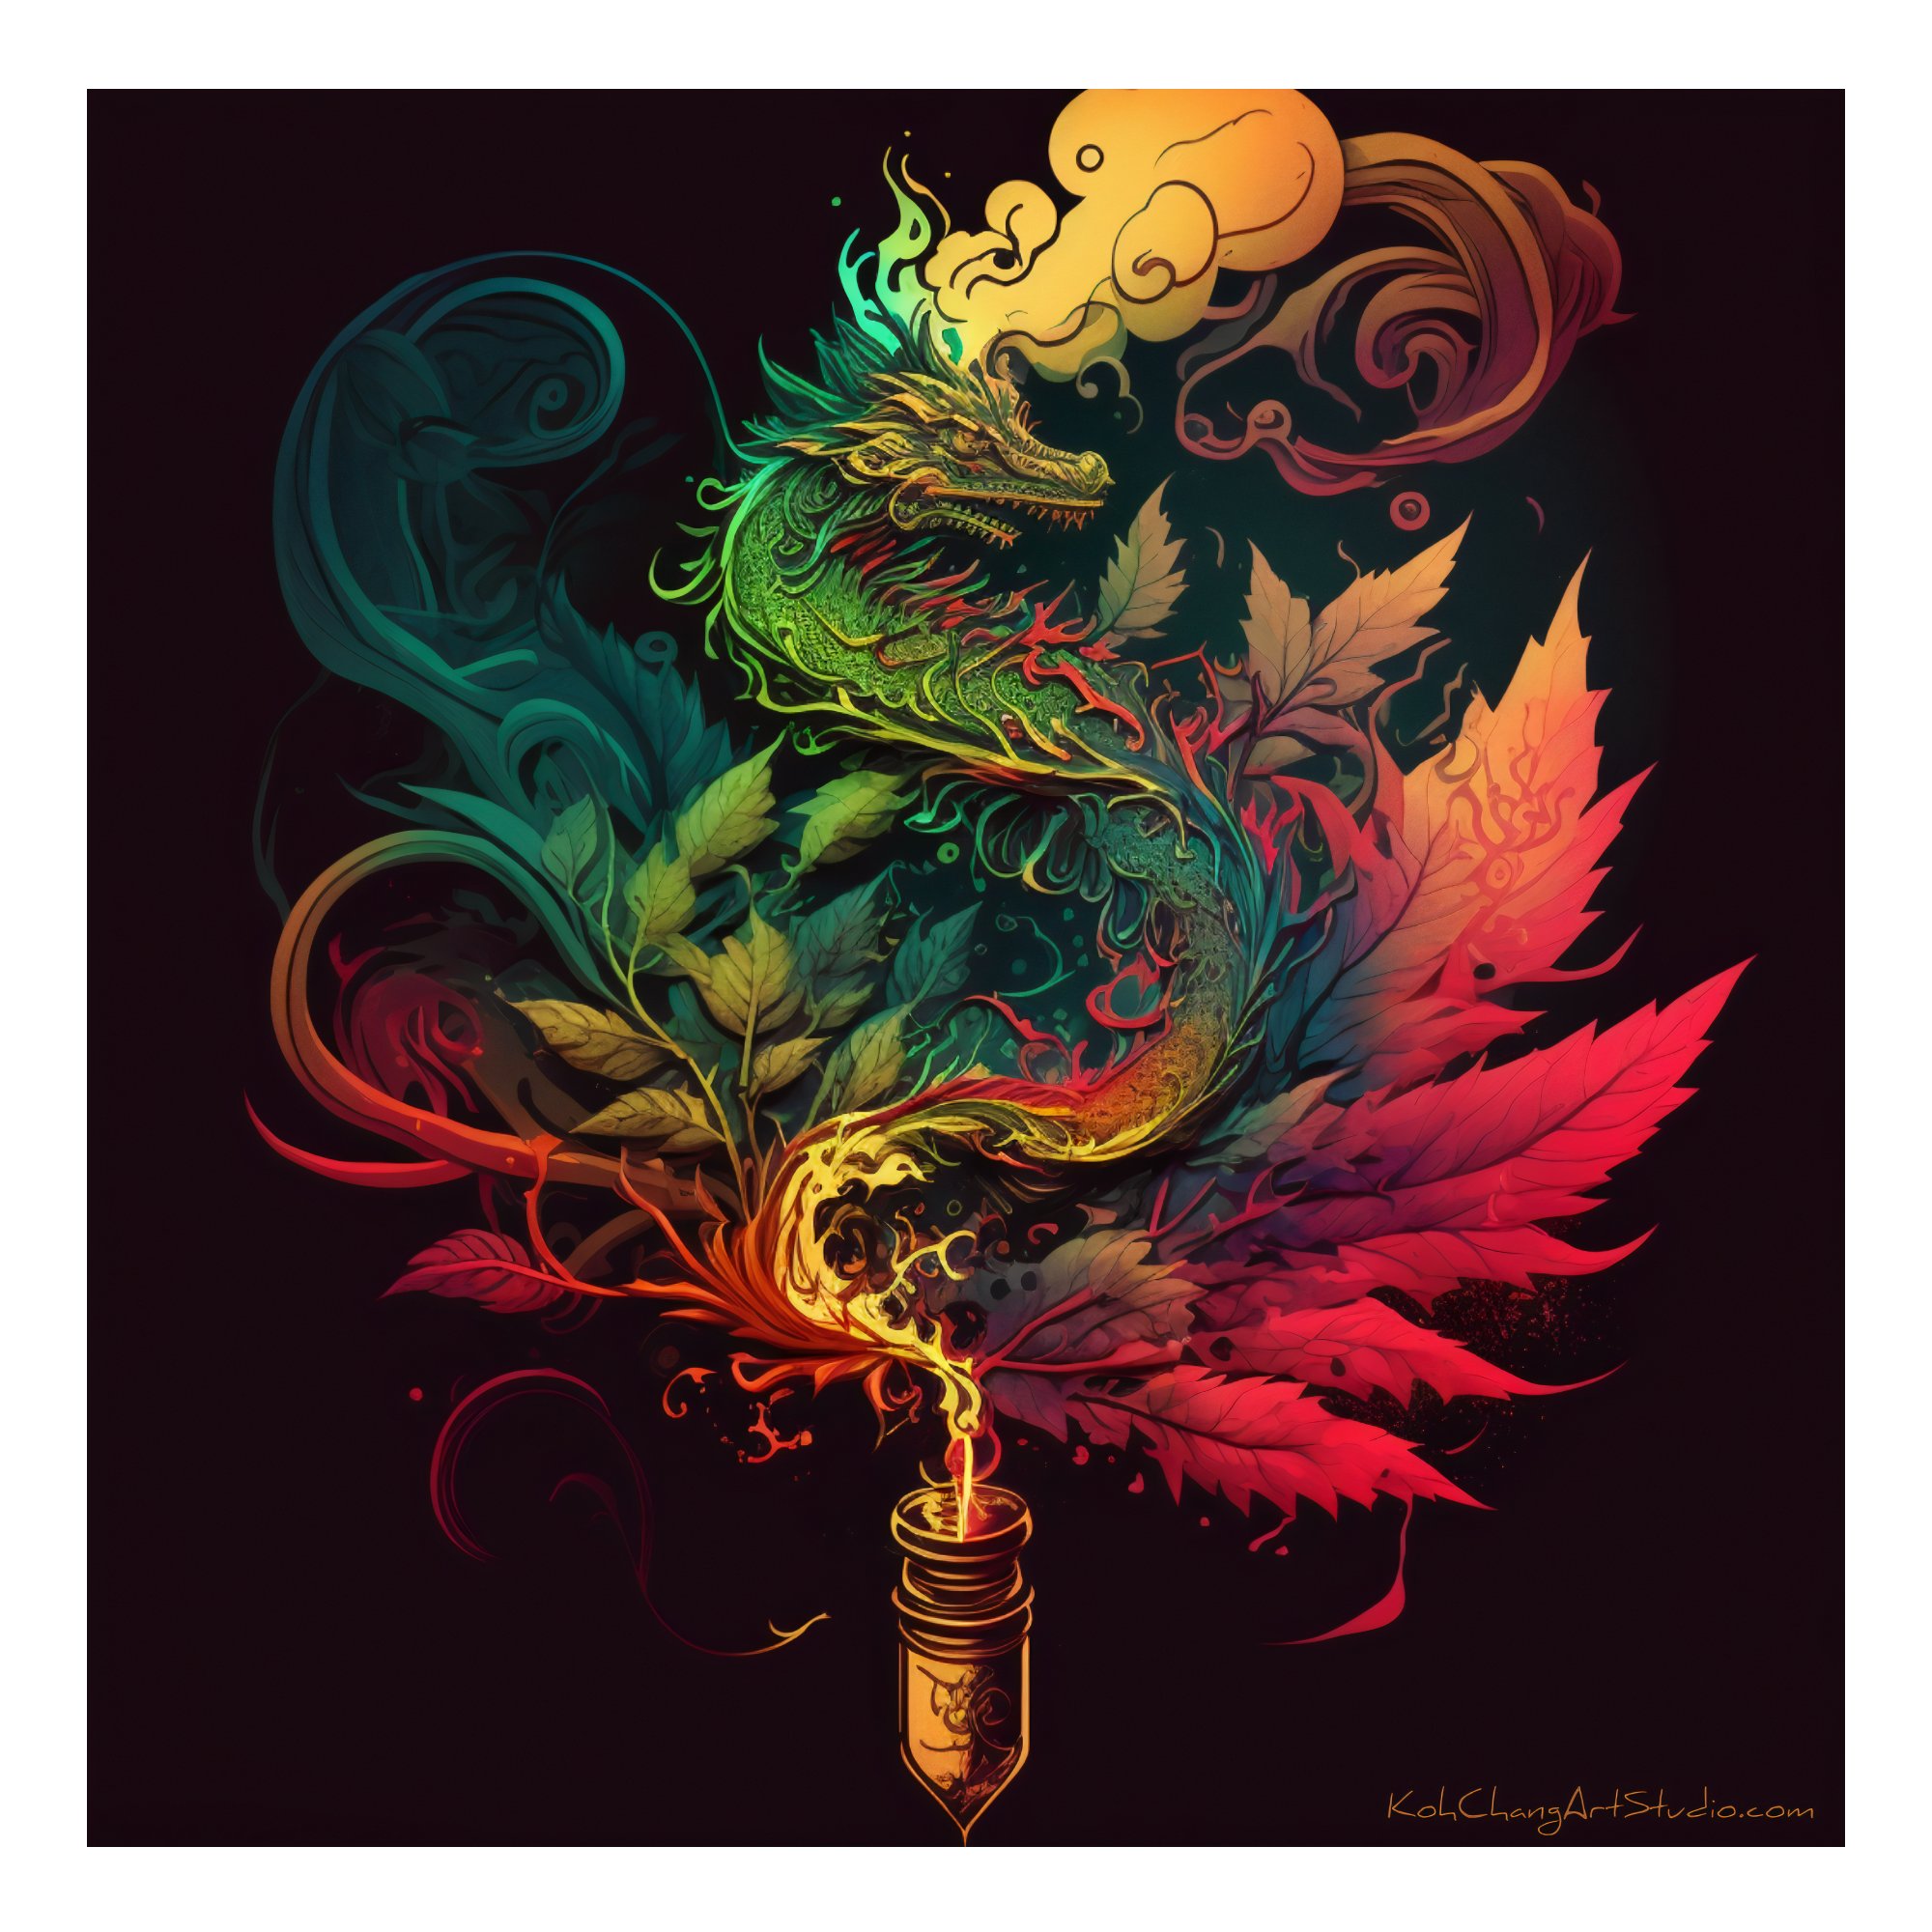 CHASE THE DRAGON Artistic Image - Dragon drenched in hues, whispering tales and secrets of the herb.